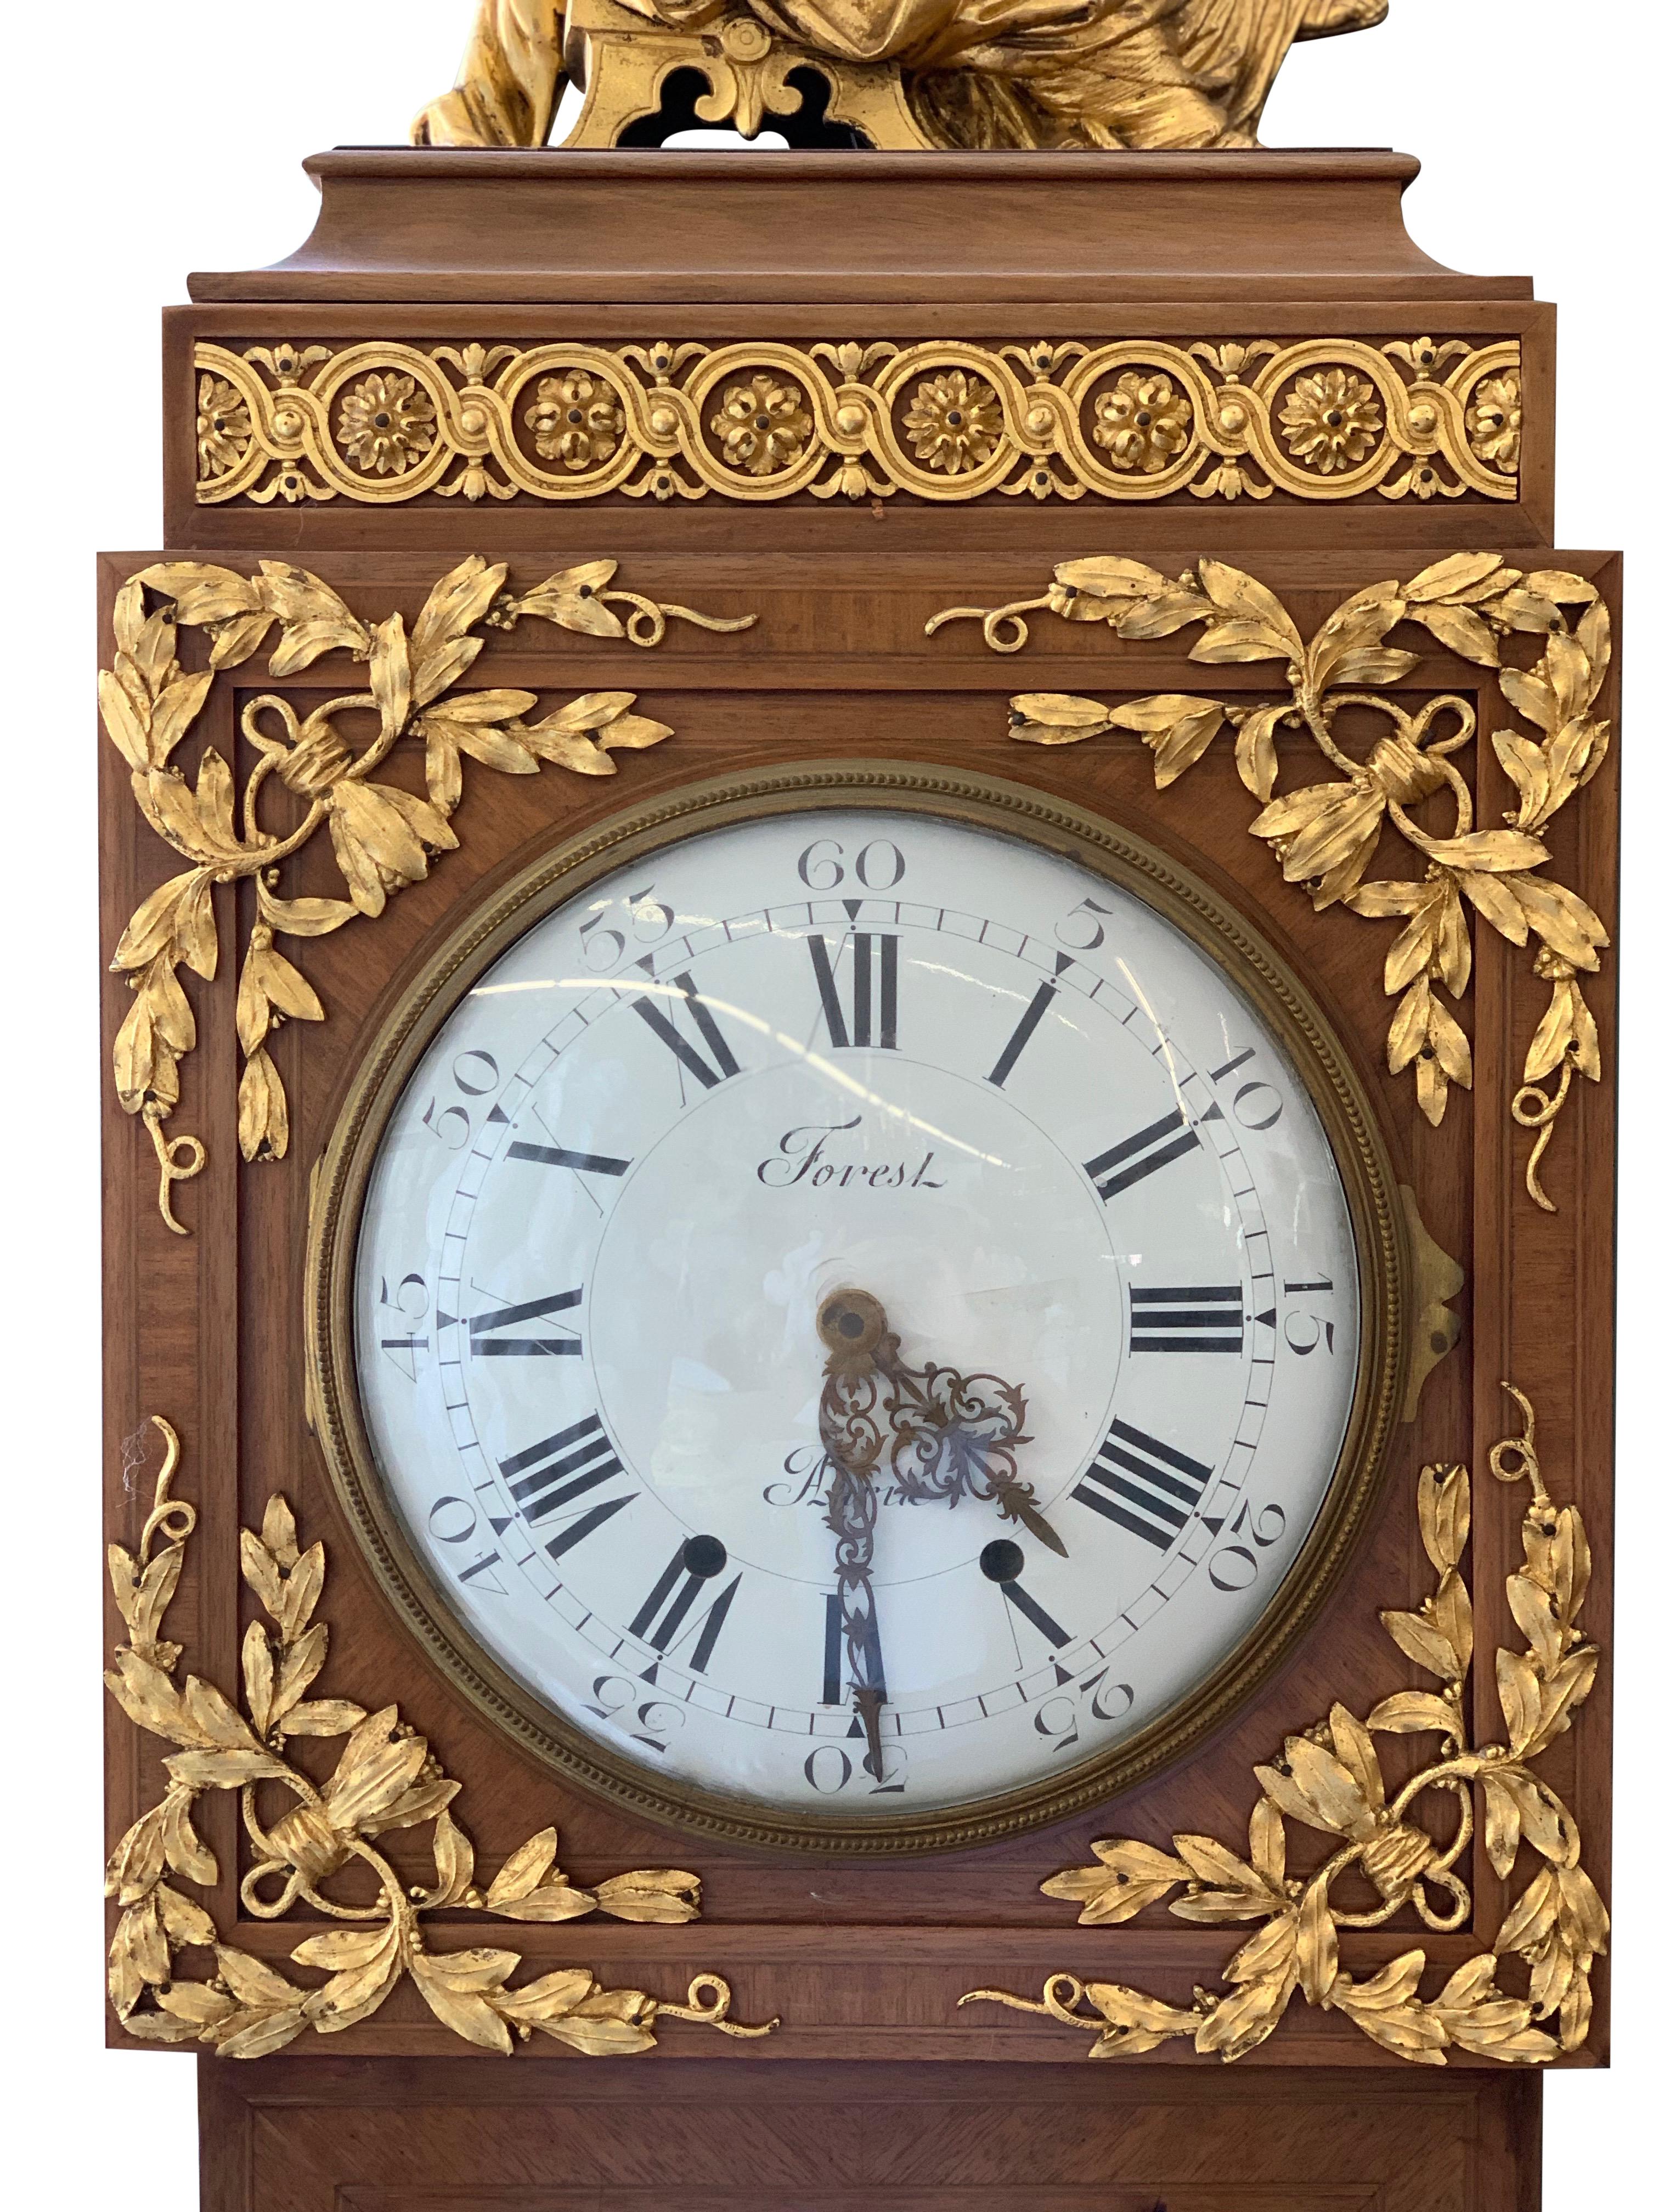 Late 19th Century French Louis XVI Style Gilt-Bronze Mounted Grandfather Clock For Sale 1